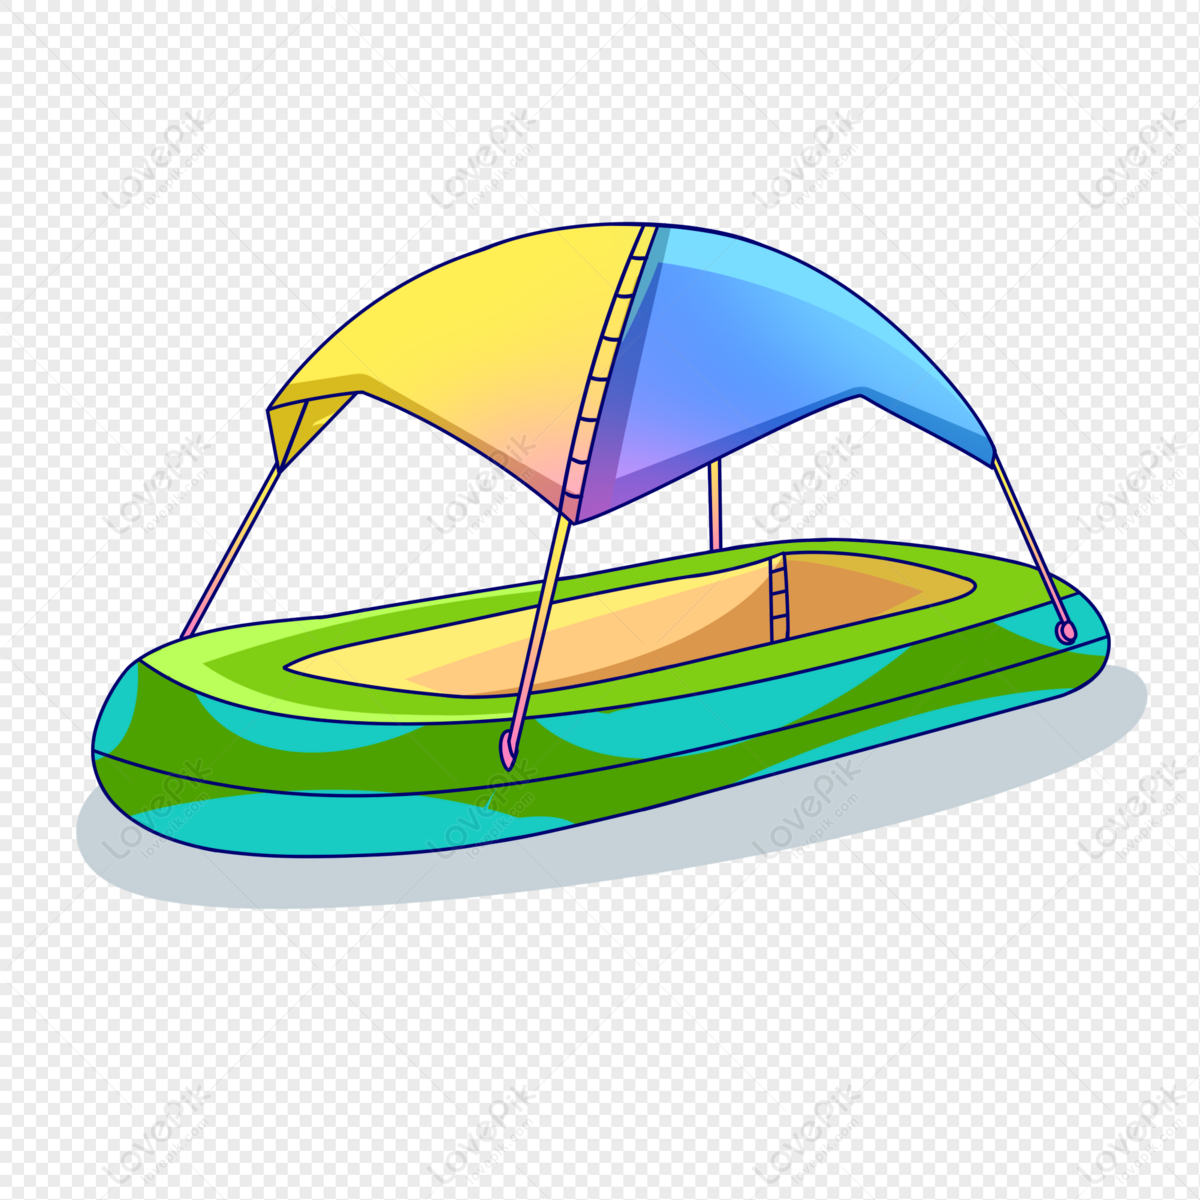 Yacht PNG Transparent Background And Clipart Image For Free Download -  Lovepik | 401529810